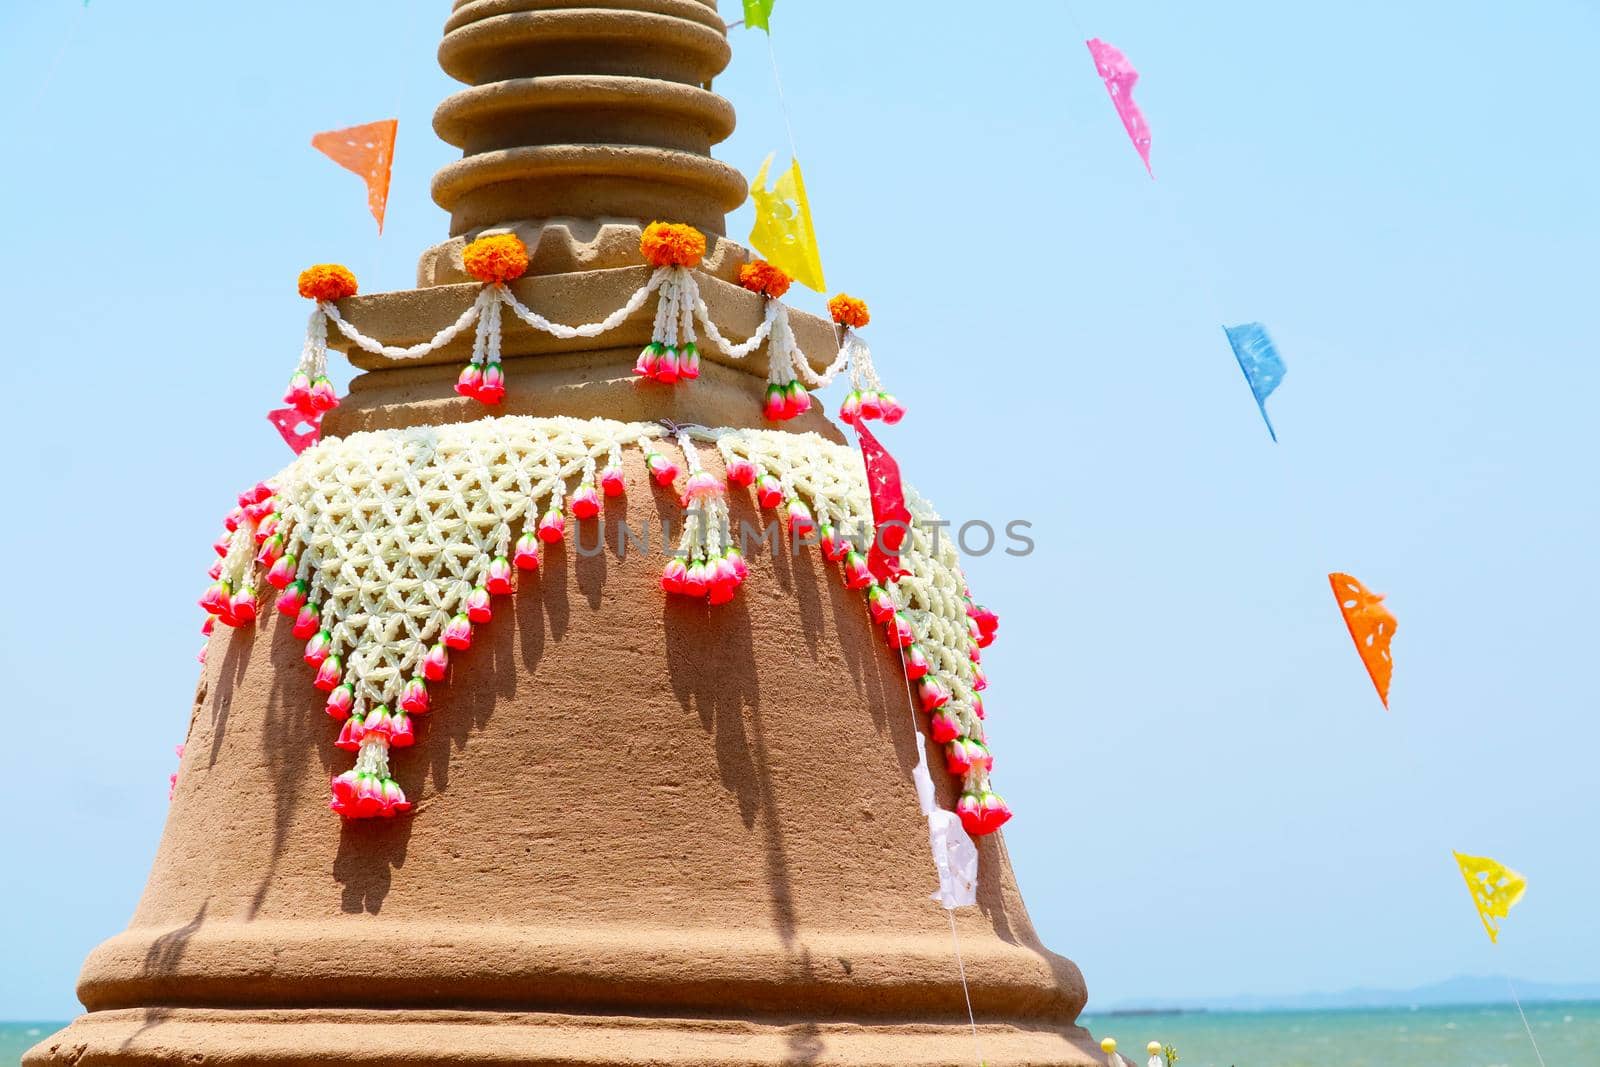 flowers on sand pagoda was carefully built, and beautifully decorated in Songkran festival by Darkfox